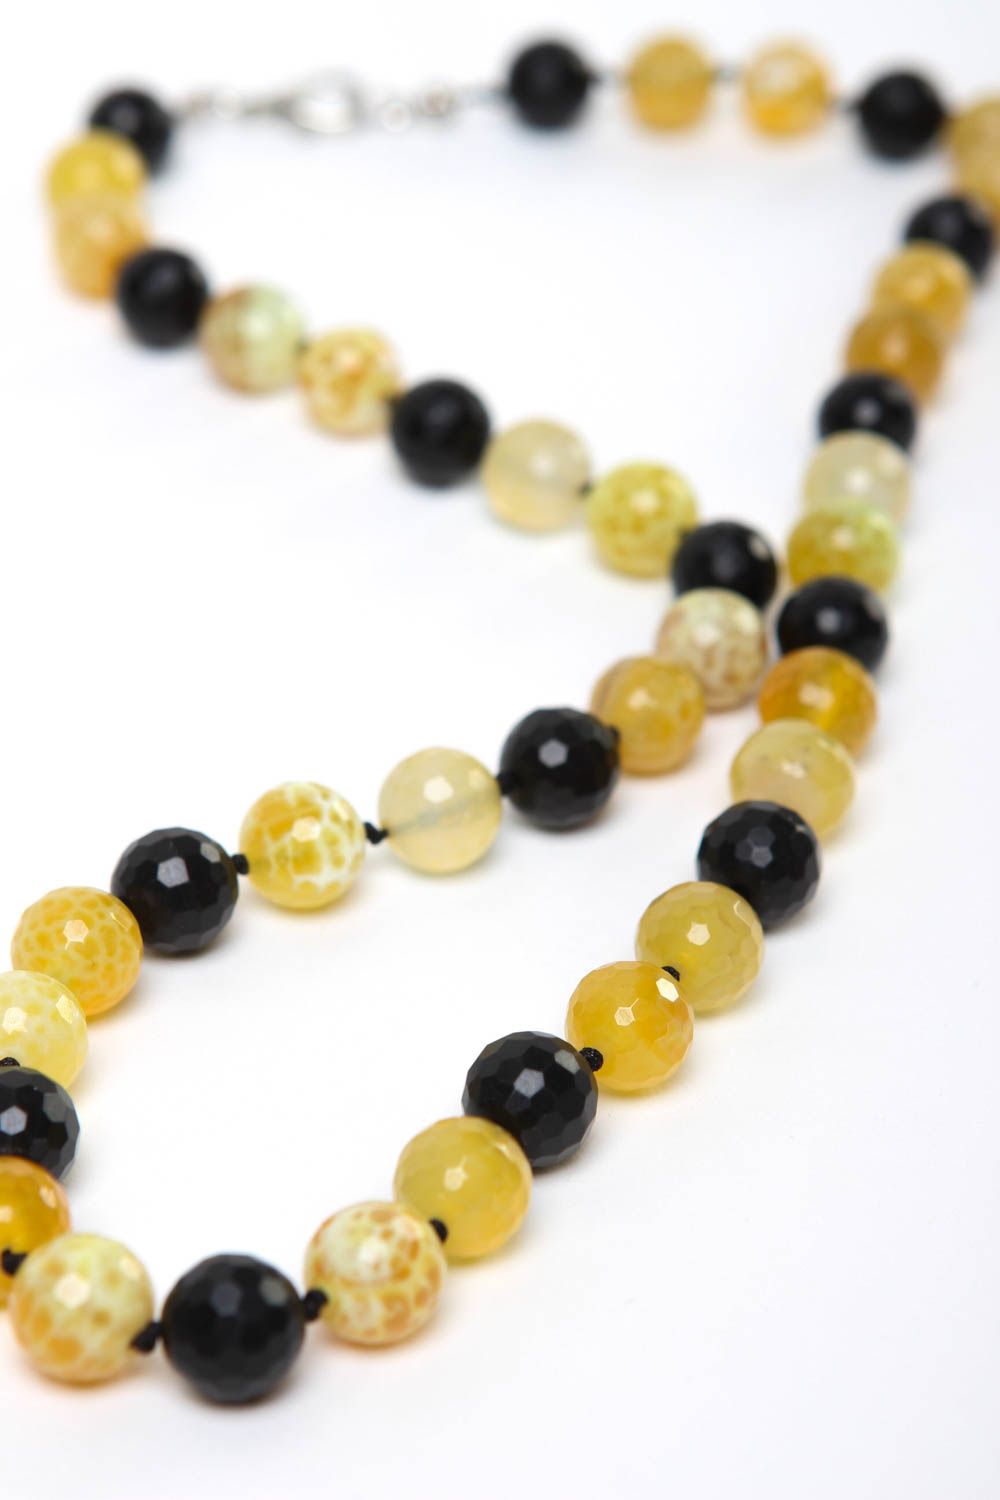 Bead necklace gemstone jewelry handmade necklace fashion accessories for women photo 3